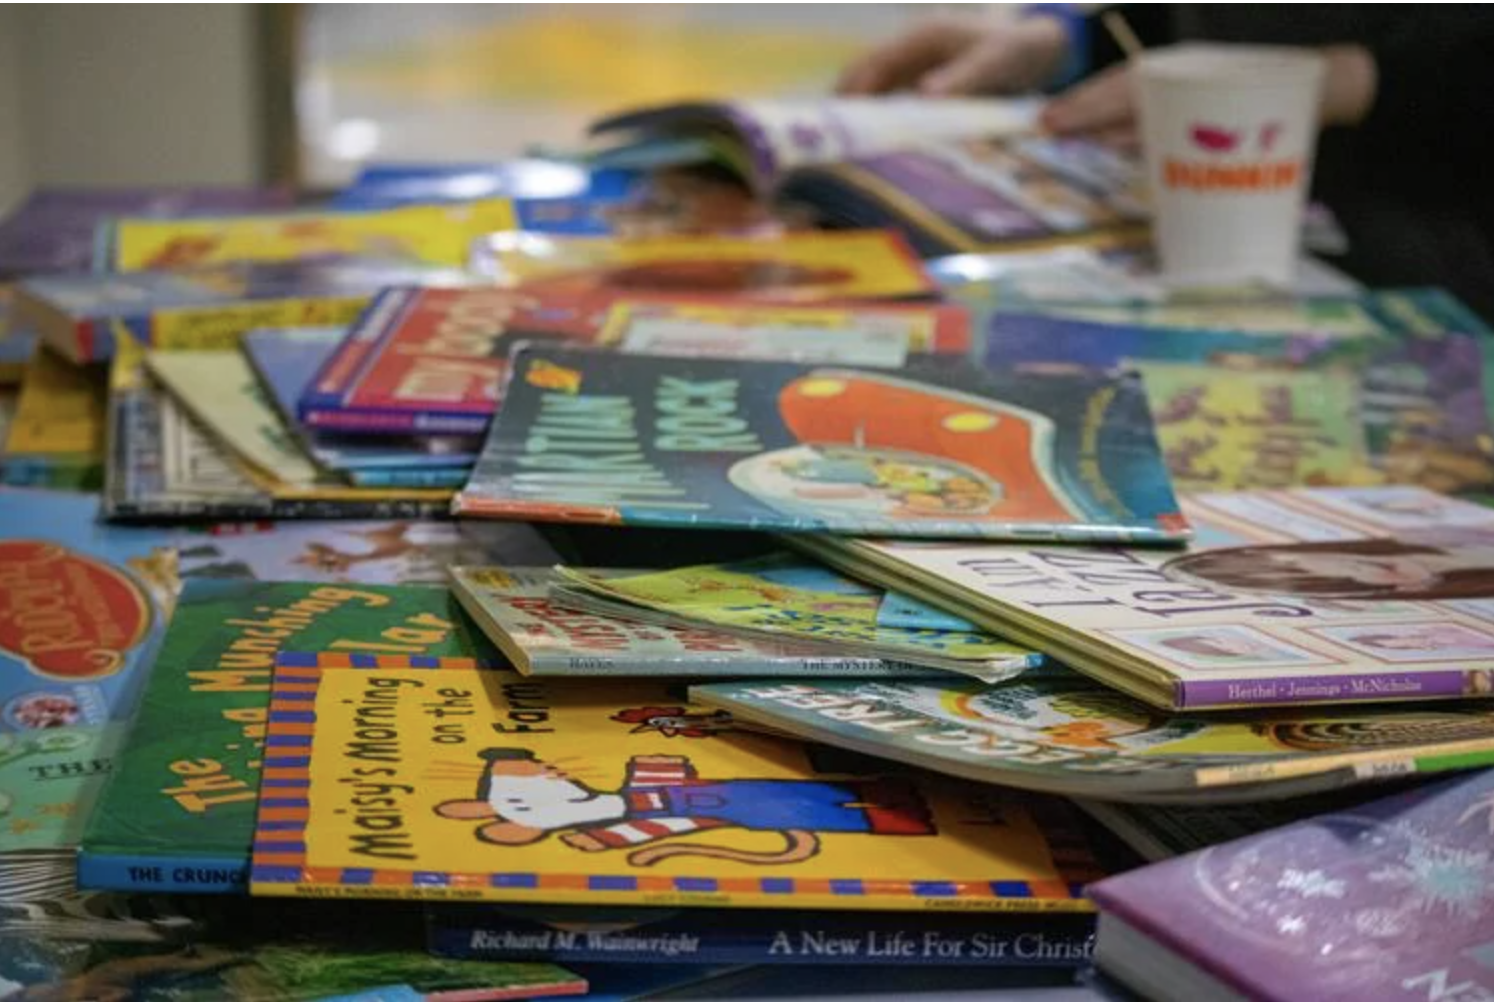  A pile of books covers a table at the Shelburne Community School on Feb. 9, as part of the school’s Read-a-thon.&nbsp;  Photo by Aylin Kursat 